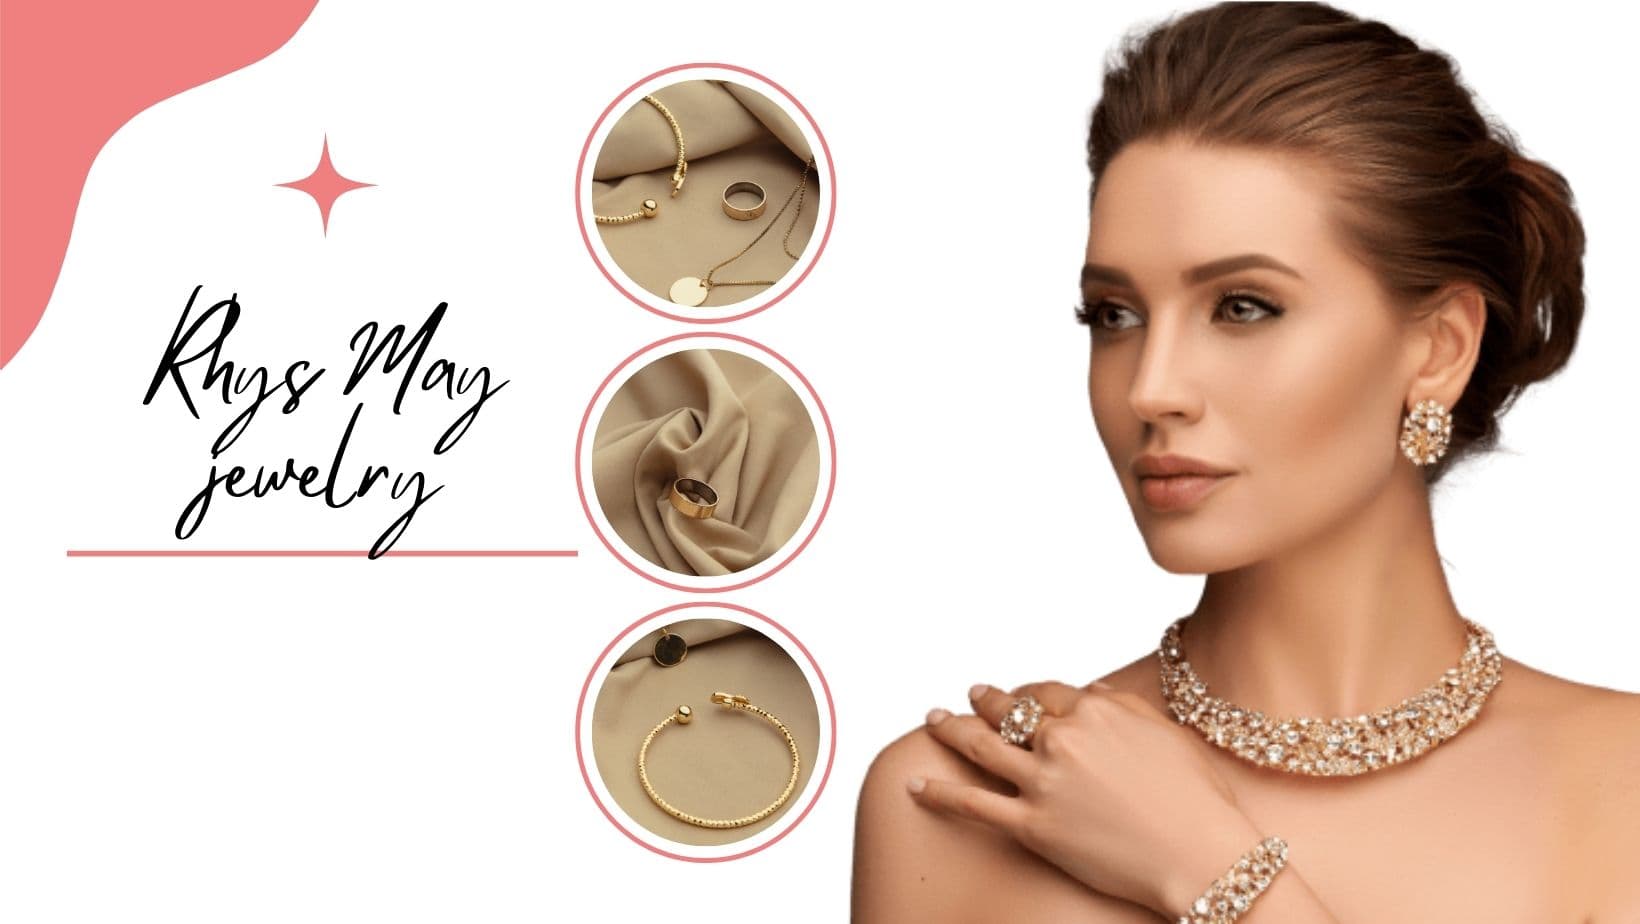 Rhys May Jewelry about us page